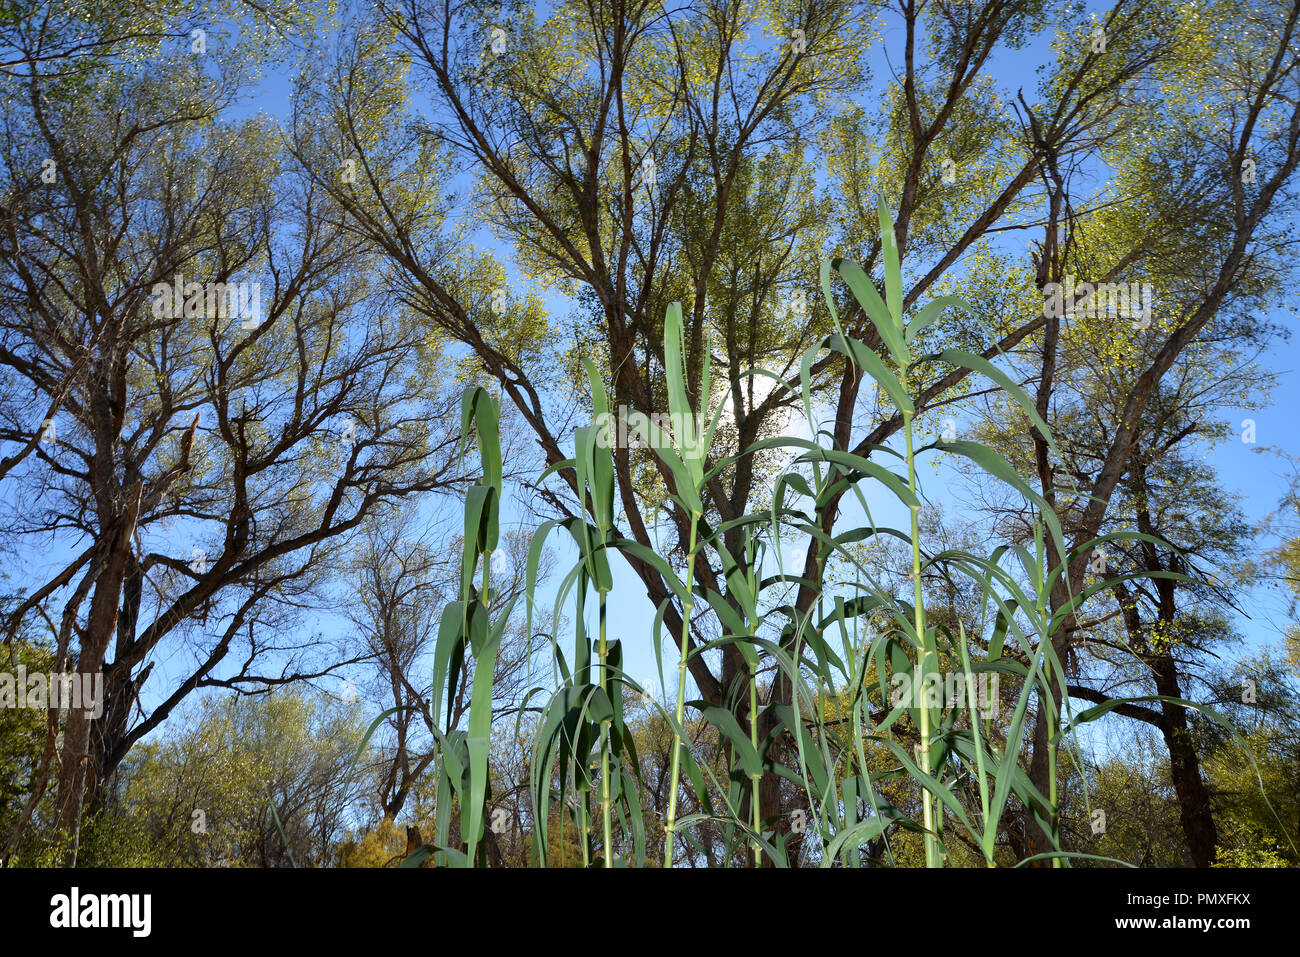 An invasive species of grass grows at the base of  canopy of trees in a riparian area that covers the Anza Trail along the Santa Cruz River, Tubac, Ar Stock Photo